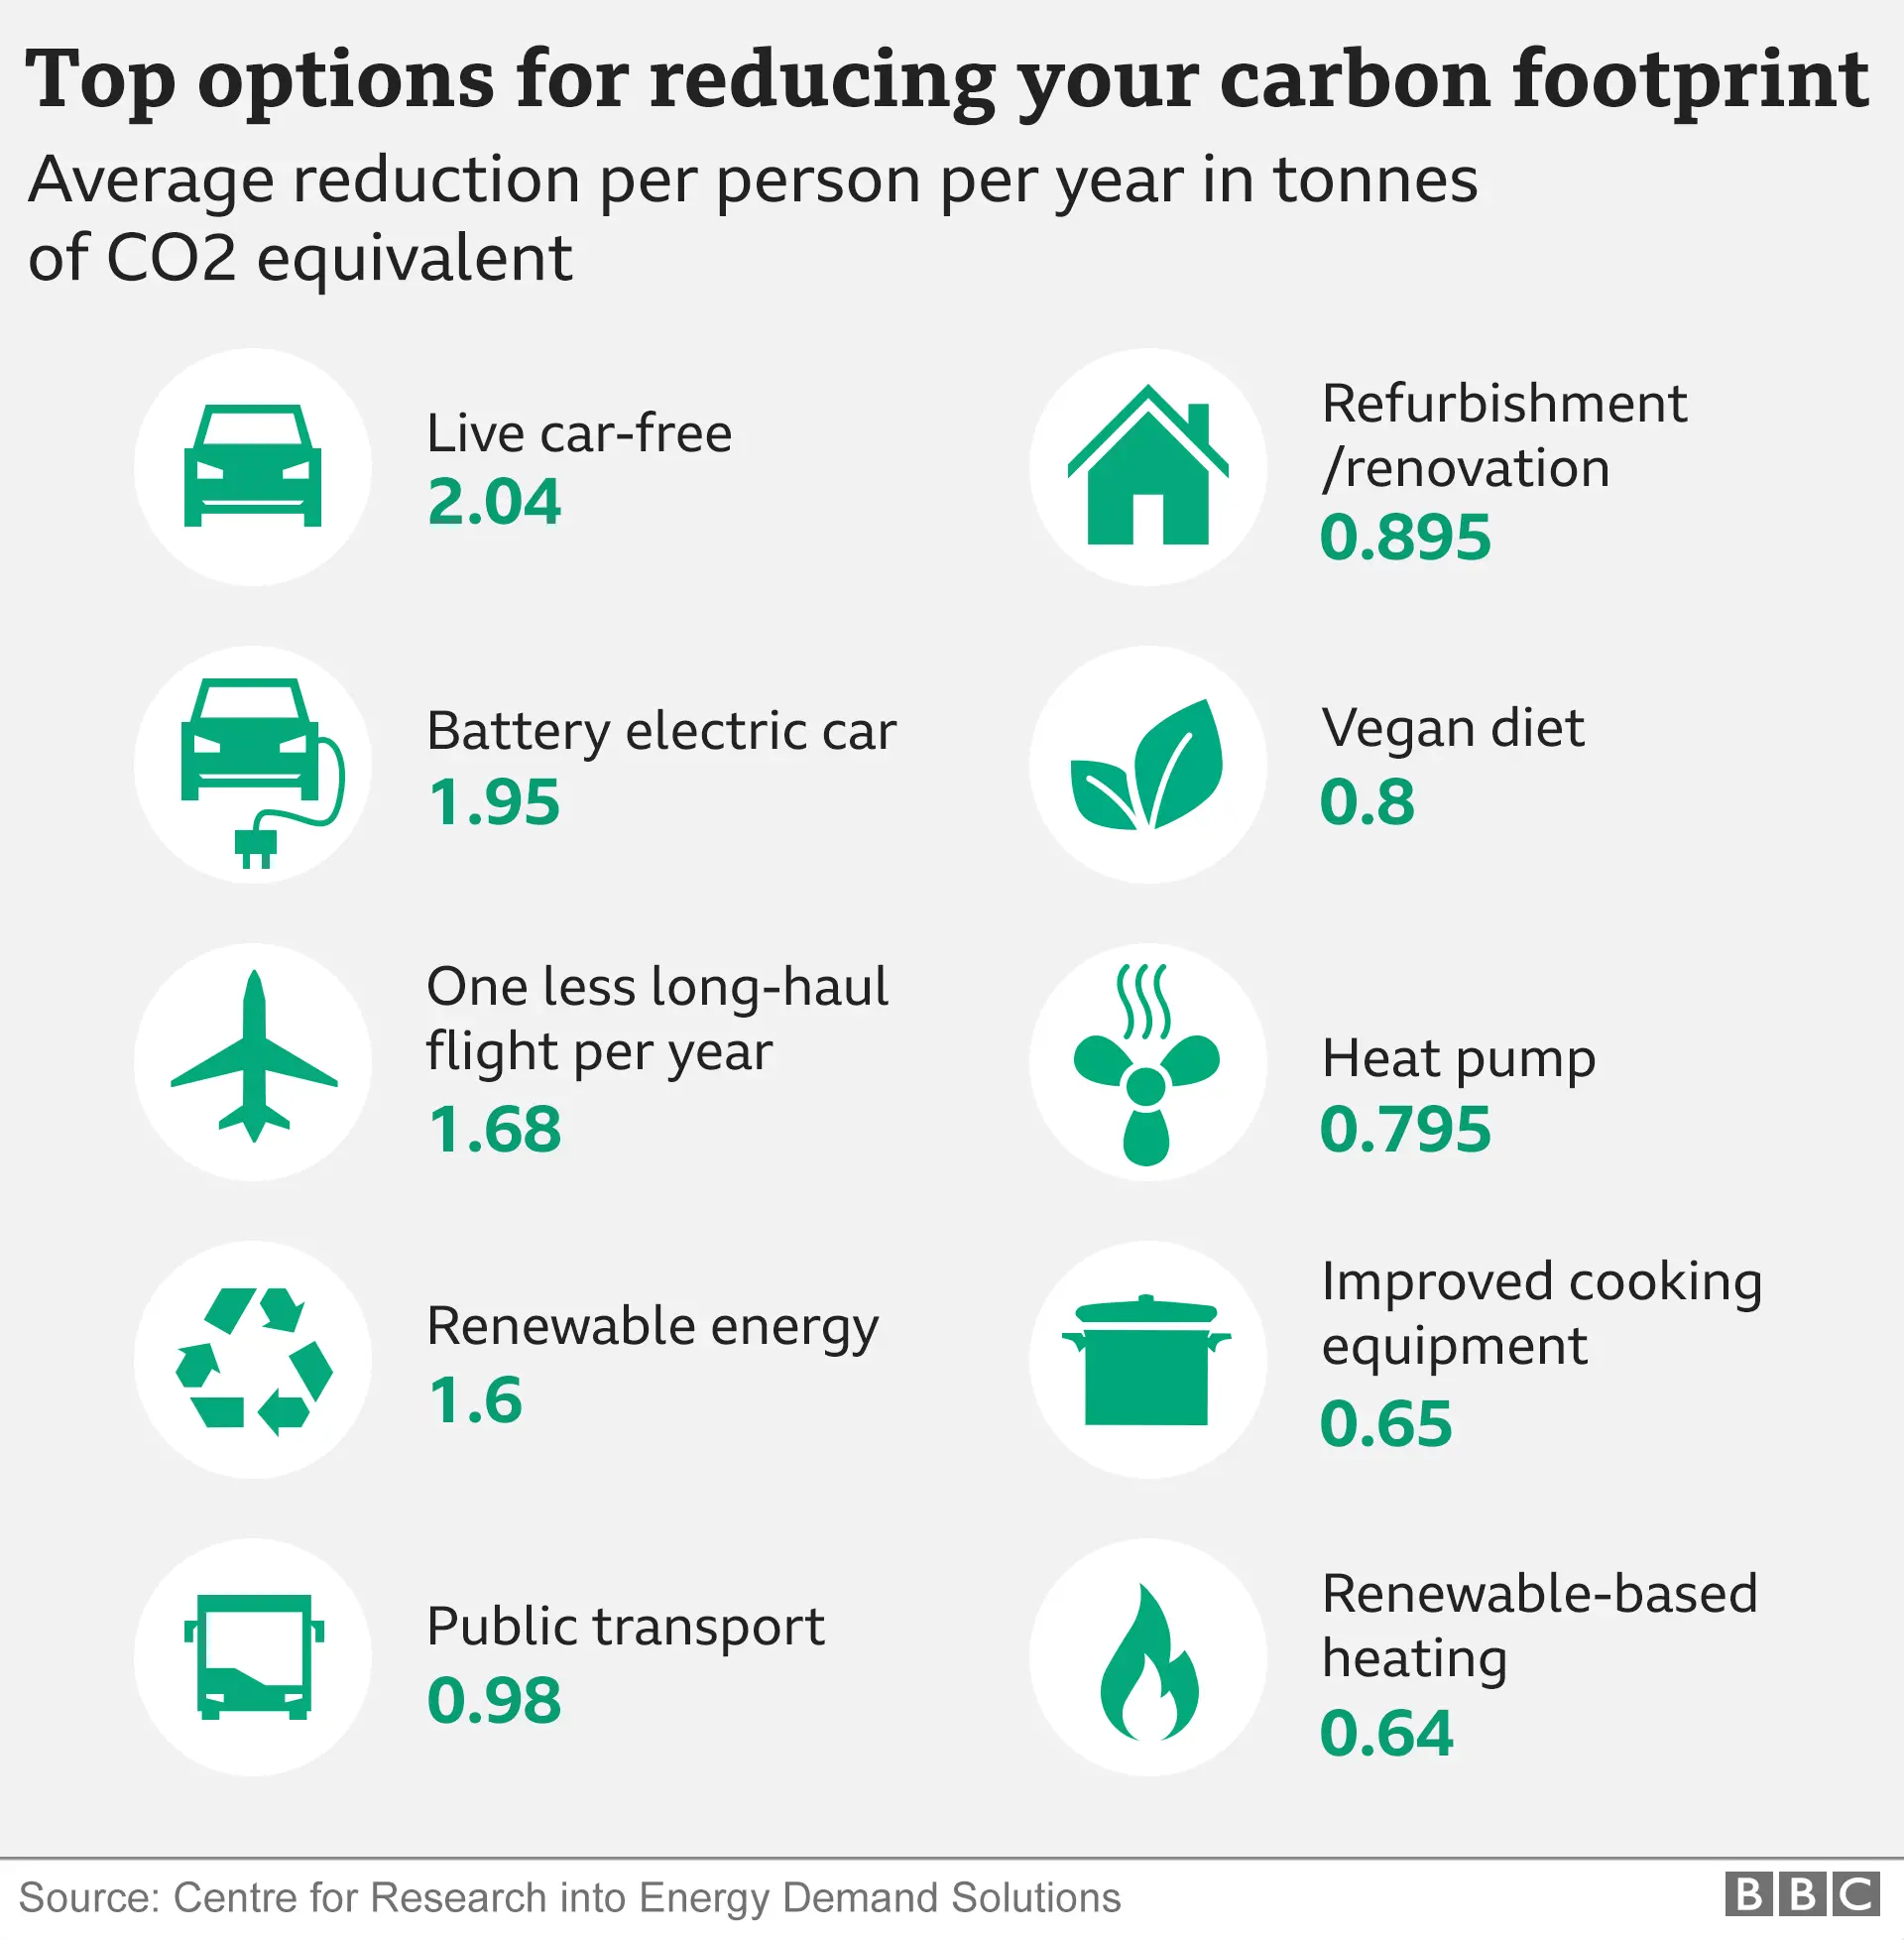 Ask Angela: What Are Easy Ways to Reduce my Carbon Footprint?